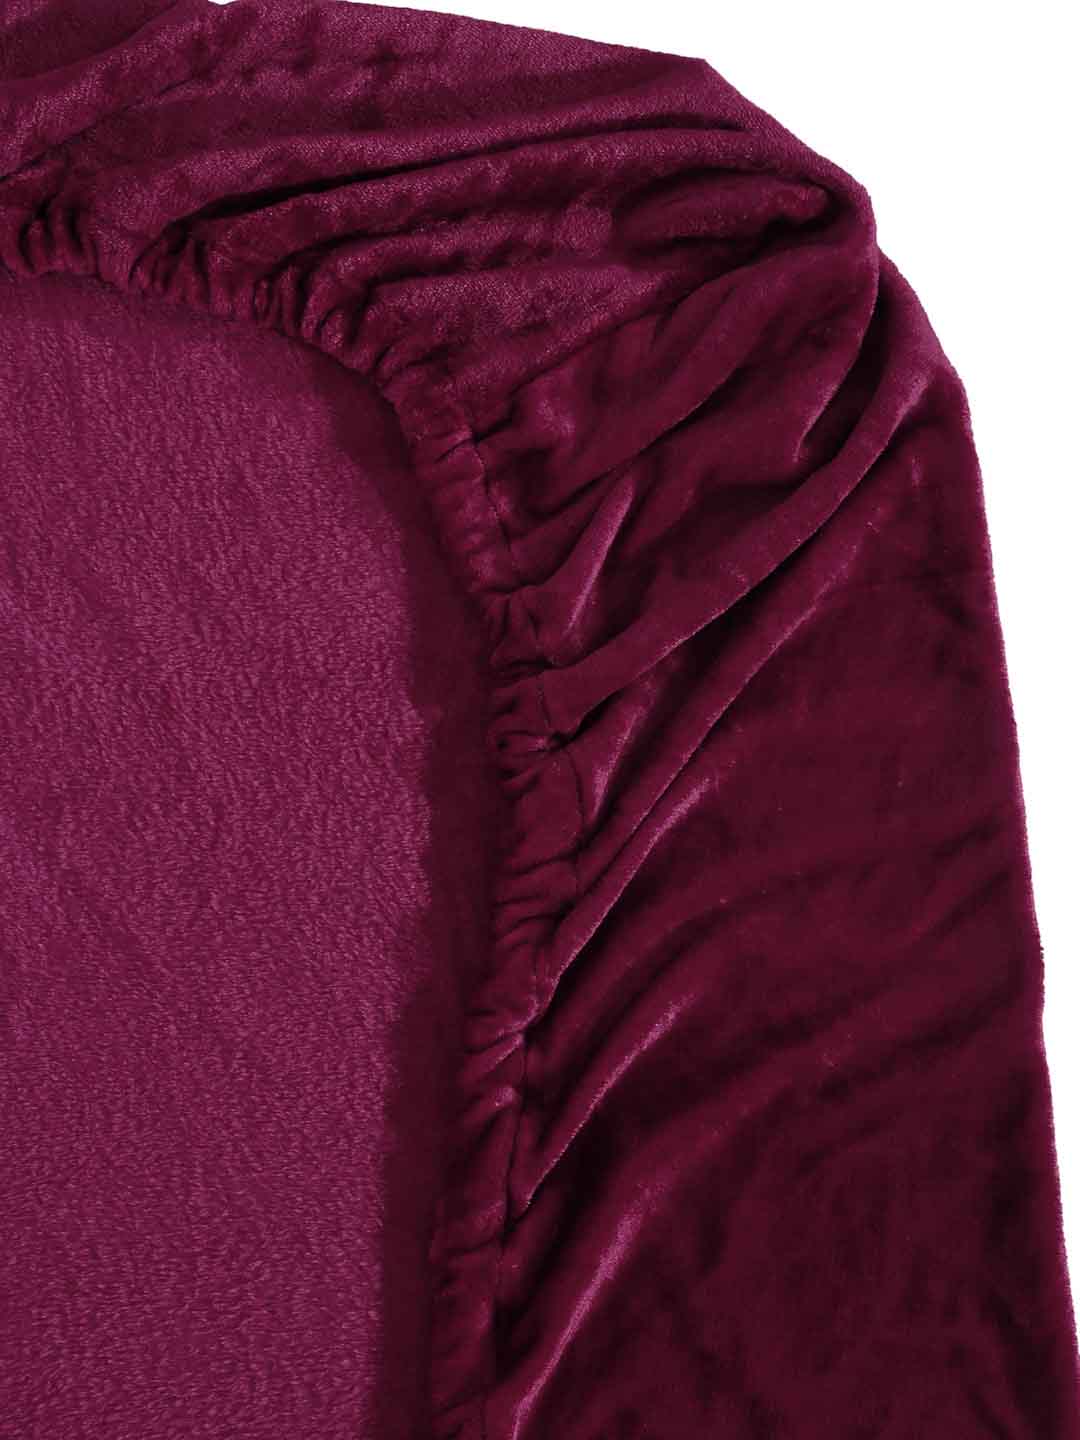 Klotthe Maroon Solid Woolen Fitted Double Bed Sheet with 2 Pillow Covers